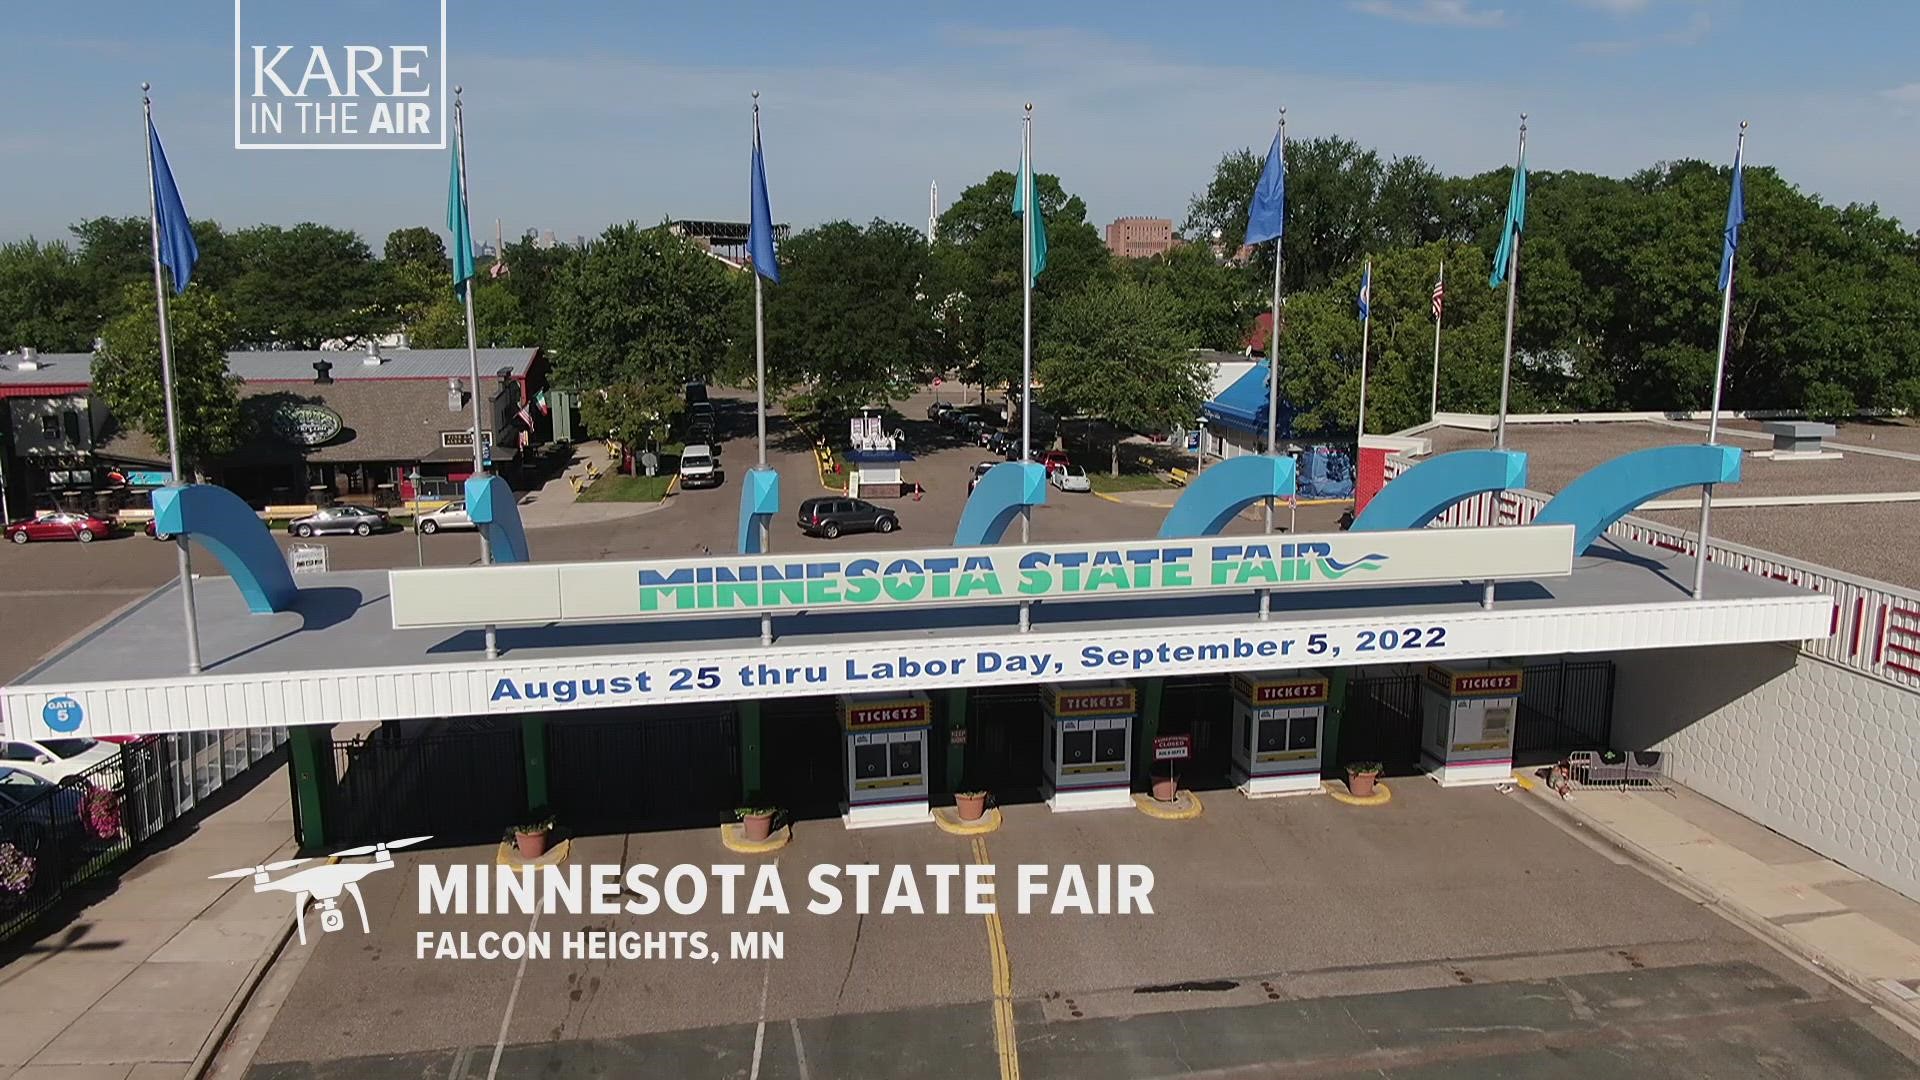 Our drone series takes us over the Minnesota State Fairgrounds, where everything is ready, but eerily quiet... waiting for the teeming crowds to arrive.